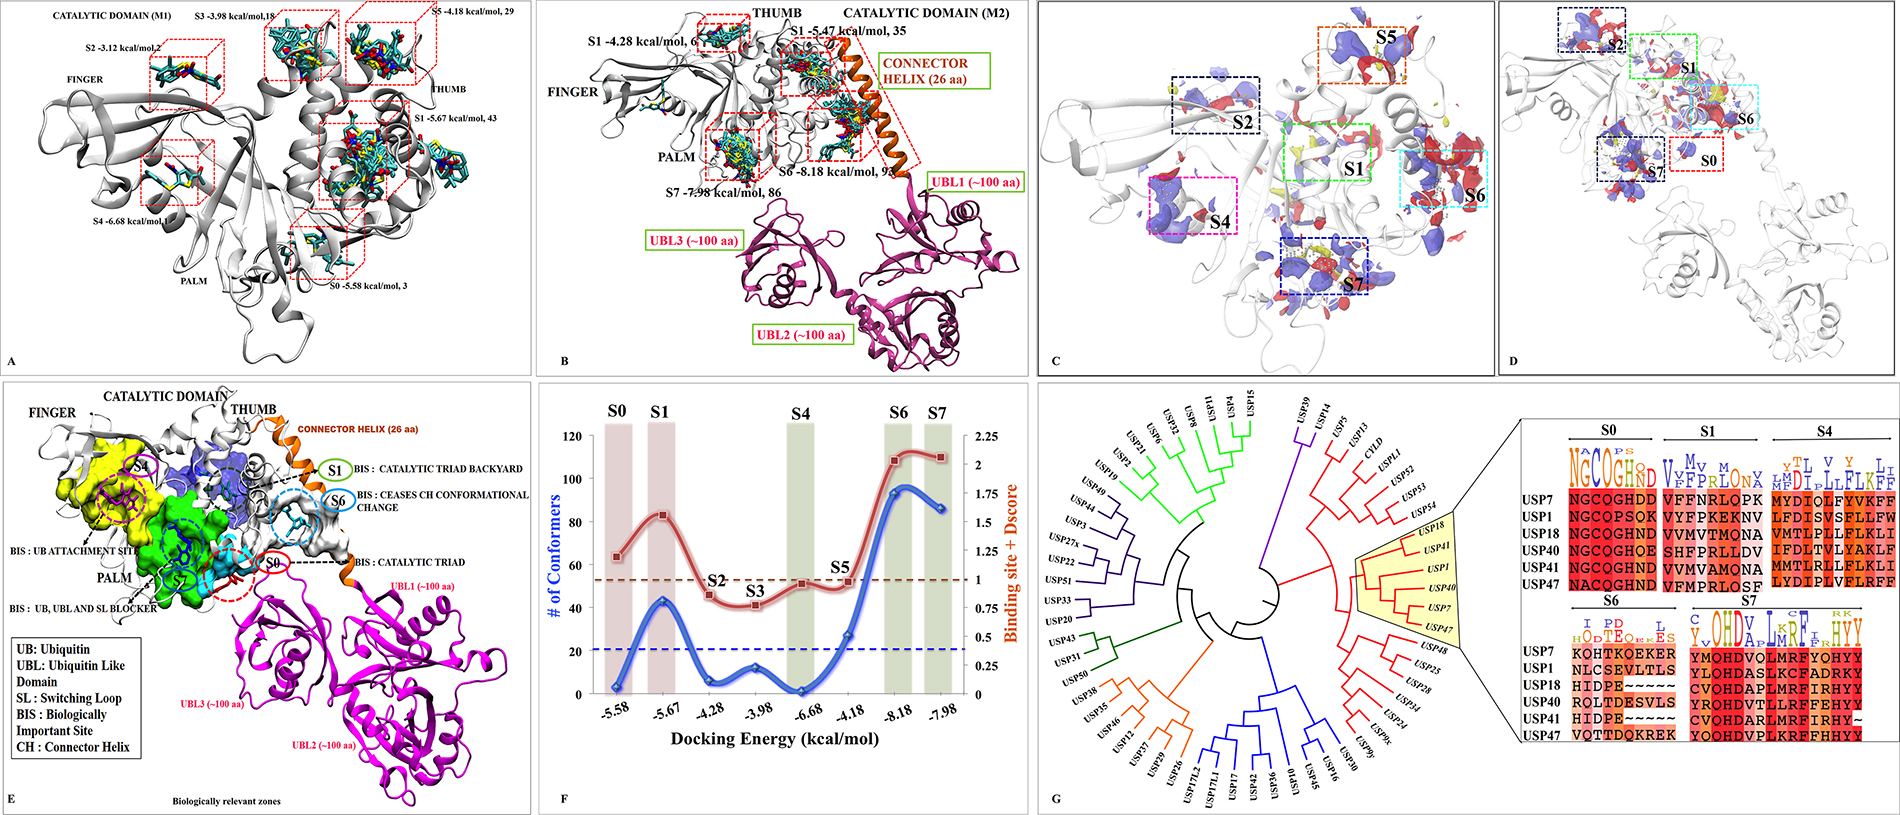 Possible binding sites and poses found by docking and SiteMap correlating with biological significance of each site.